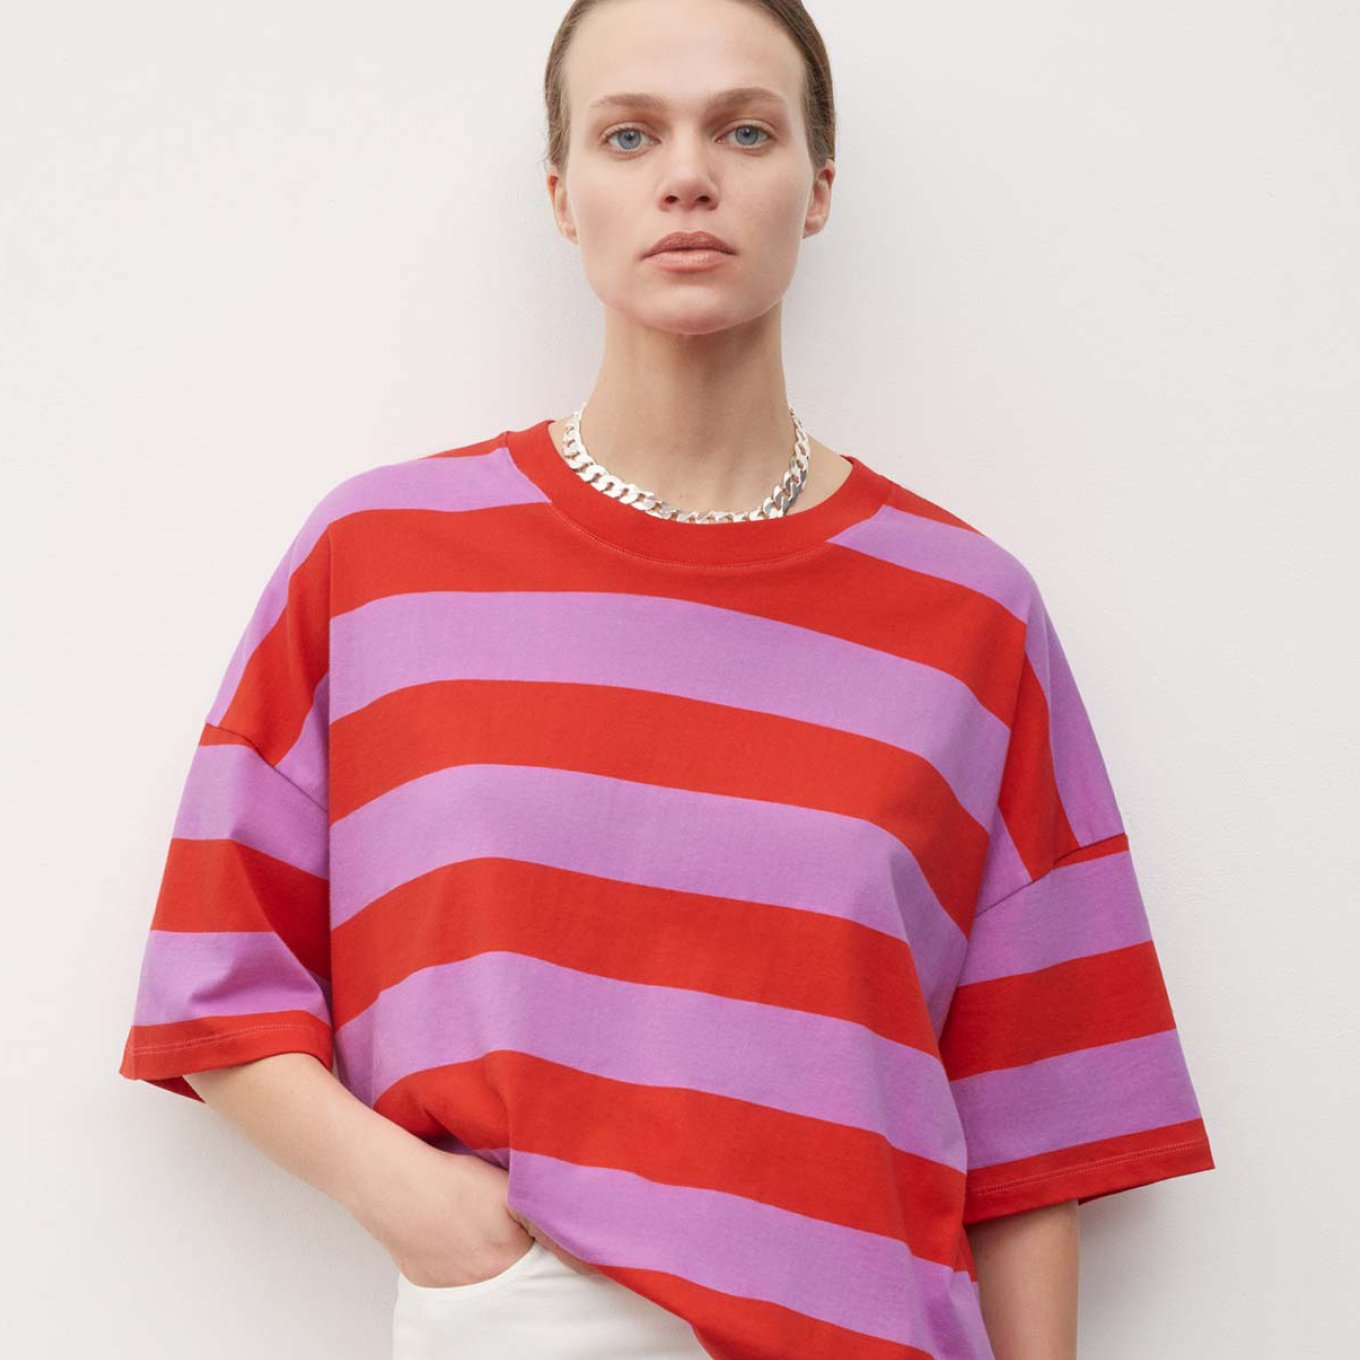 Fairtrade cotton red and purple stripe T Shirt from Kowtow